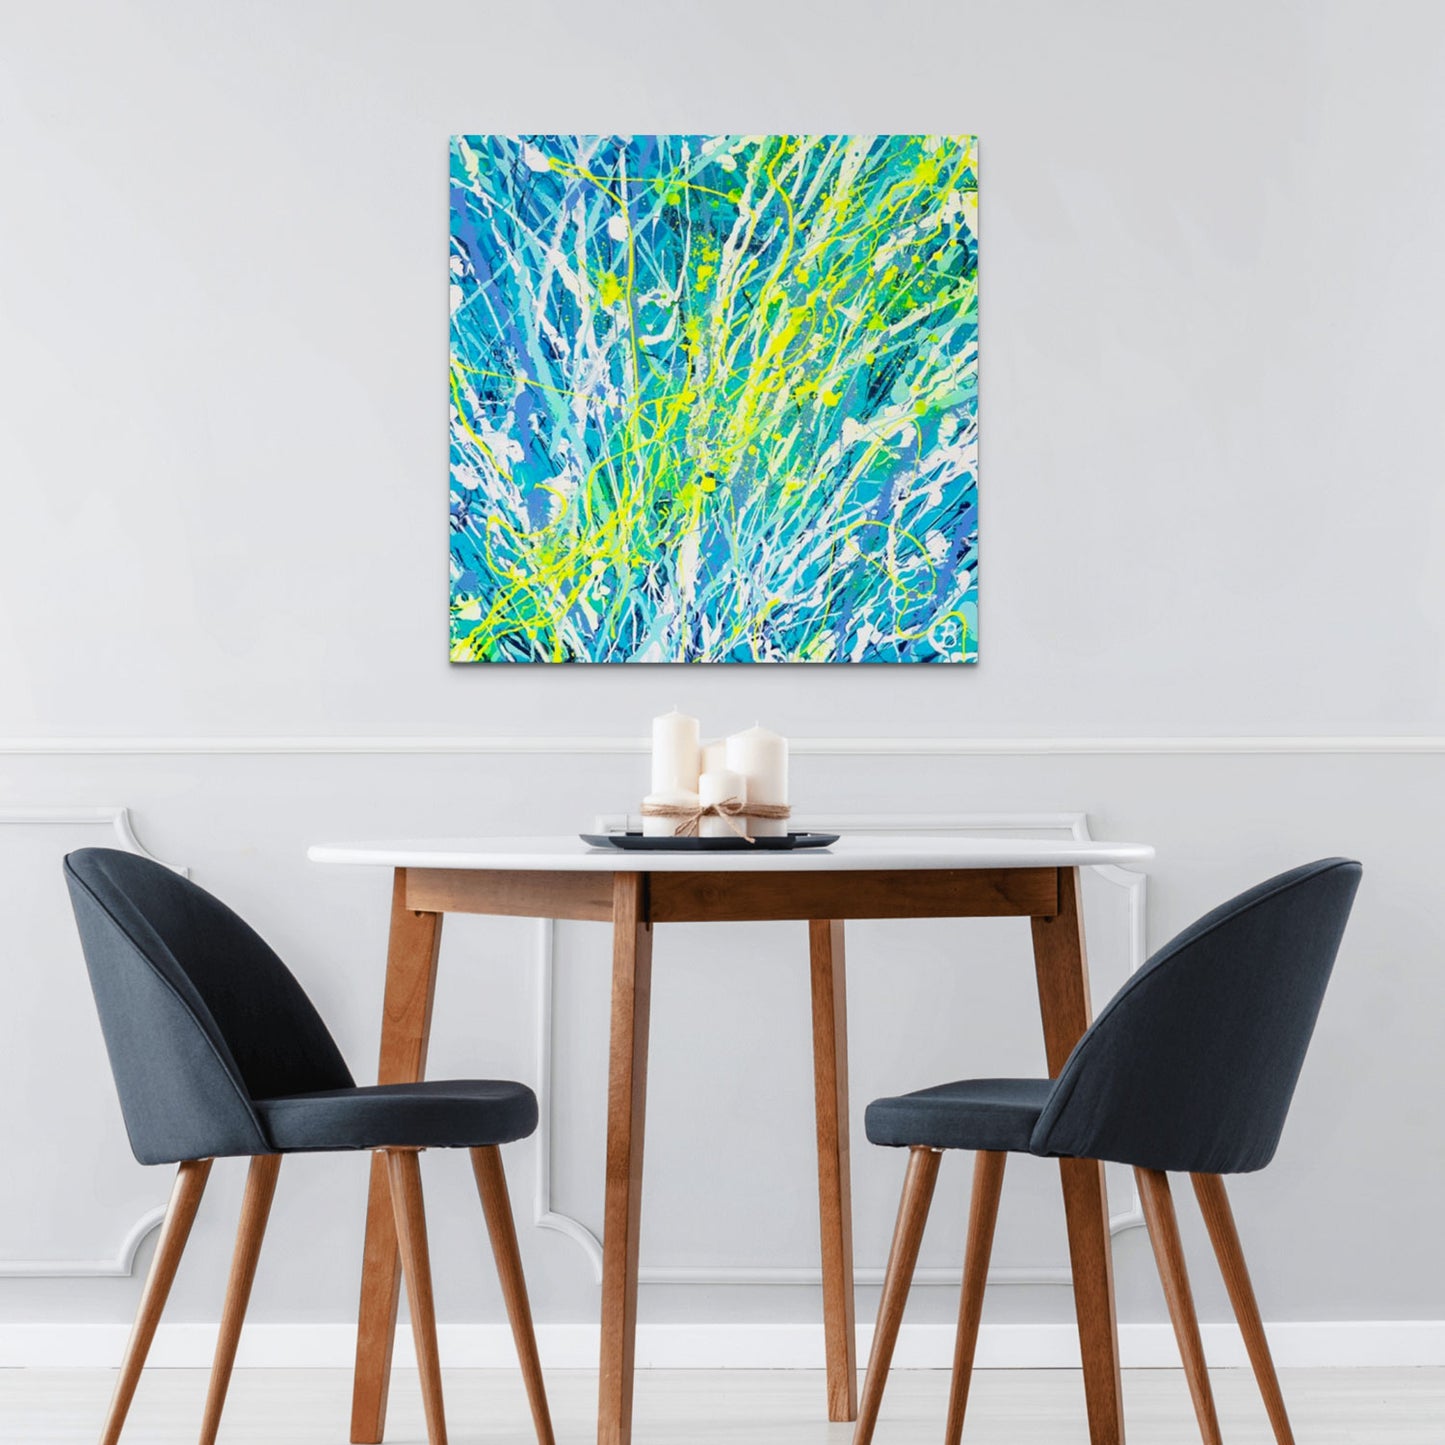 'Luminescence' Original Painting Abstract Expressionism by Bridget Bradley seen hanging above Dining Table and Black Chairs. Vibrant contemporary art.